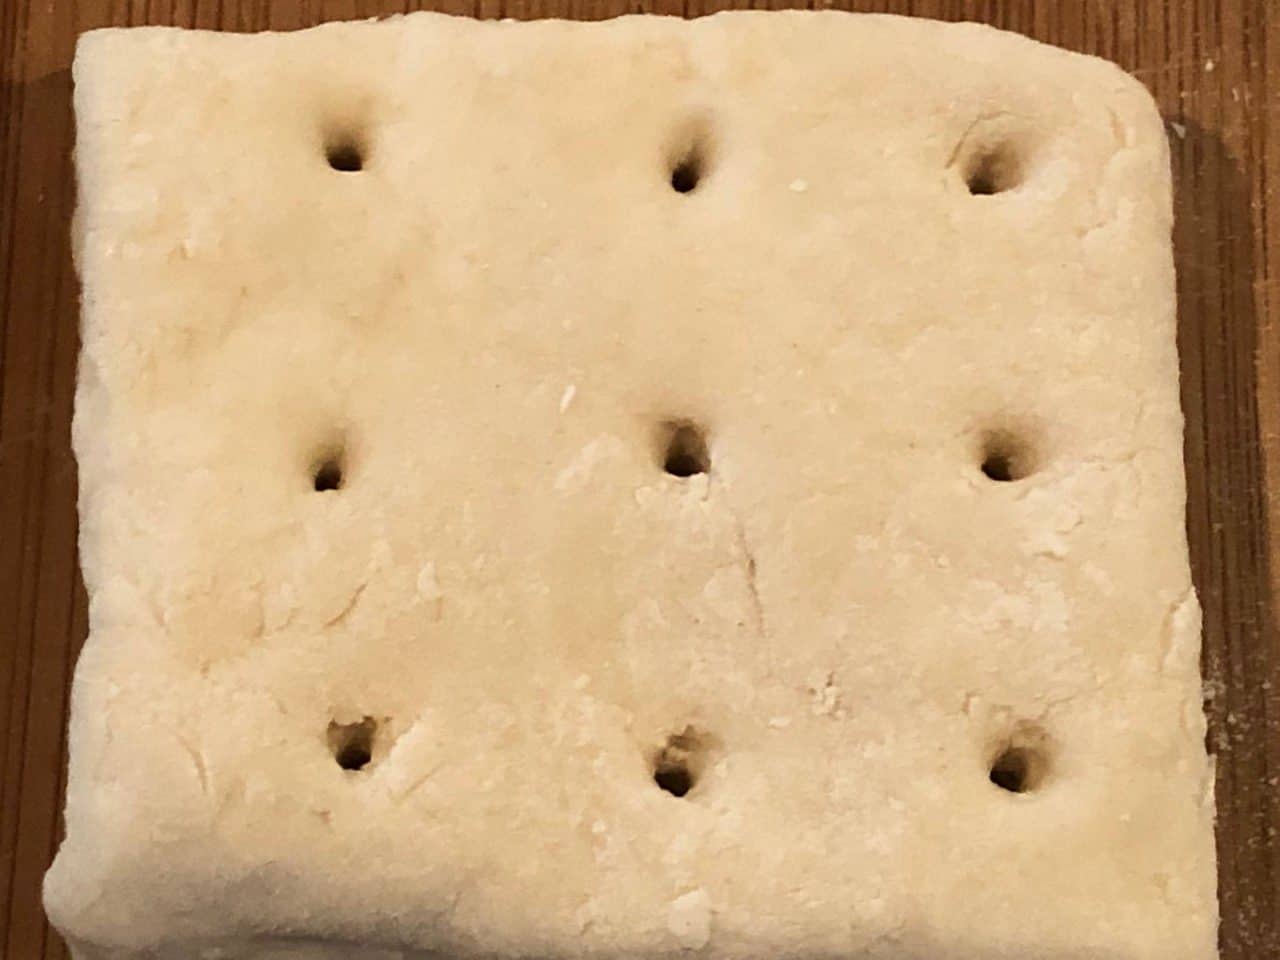 where does the word hardtack come from and what does hardtack mean